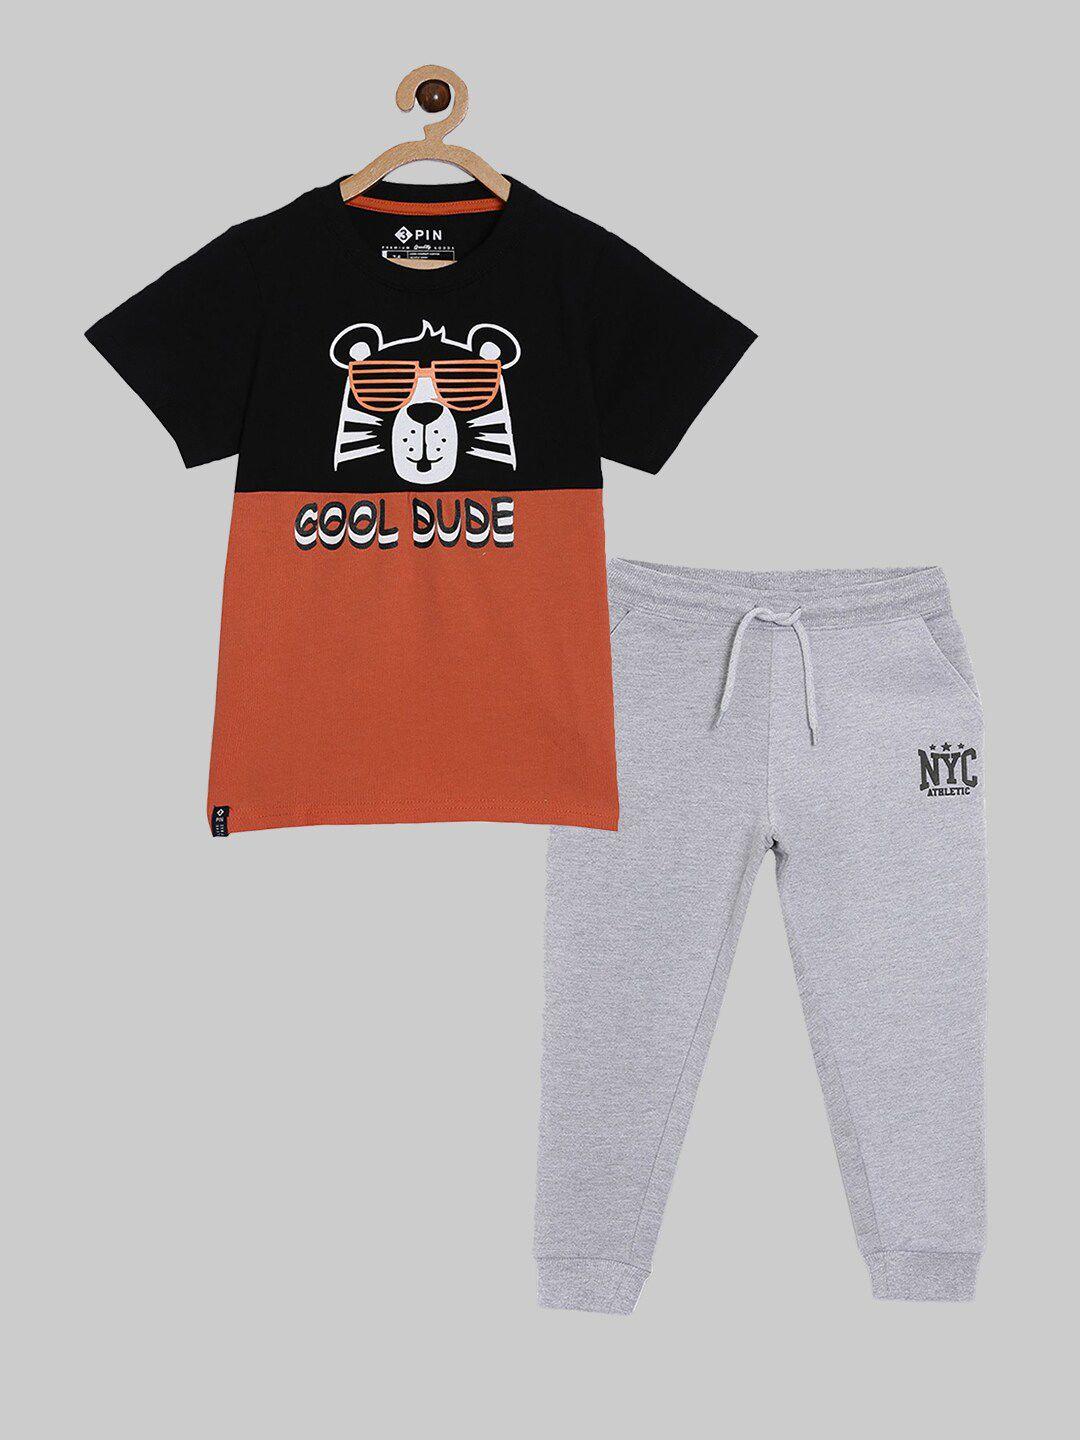 3pin boys orange & grey printed t-shirt with trousers